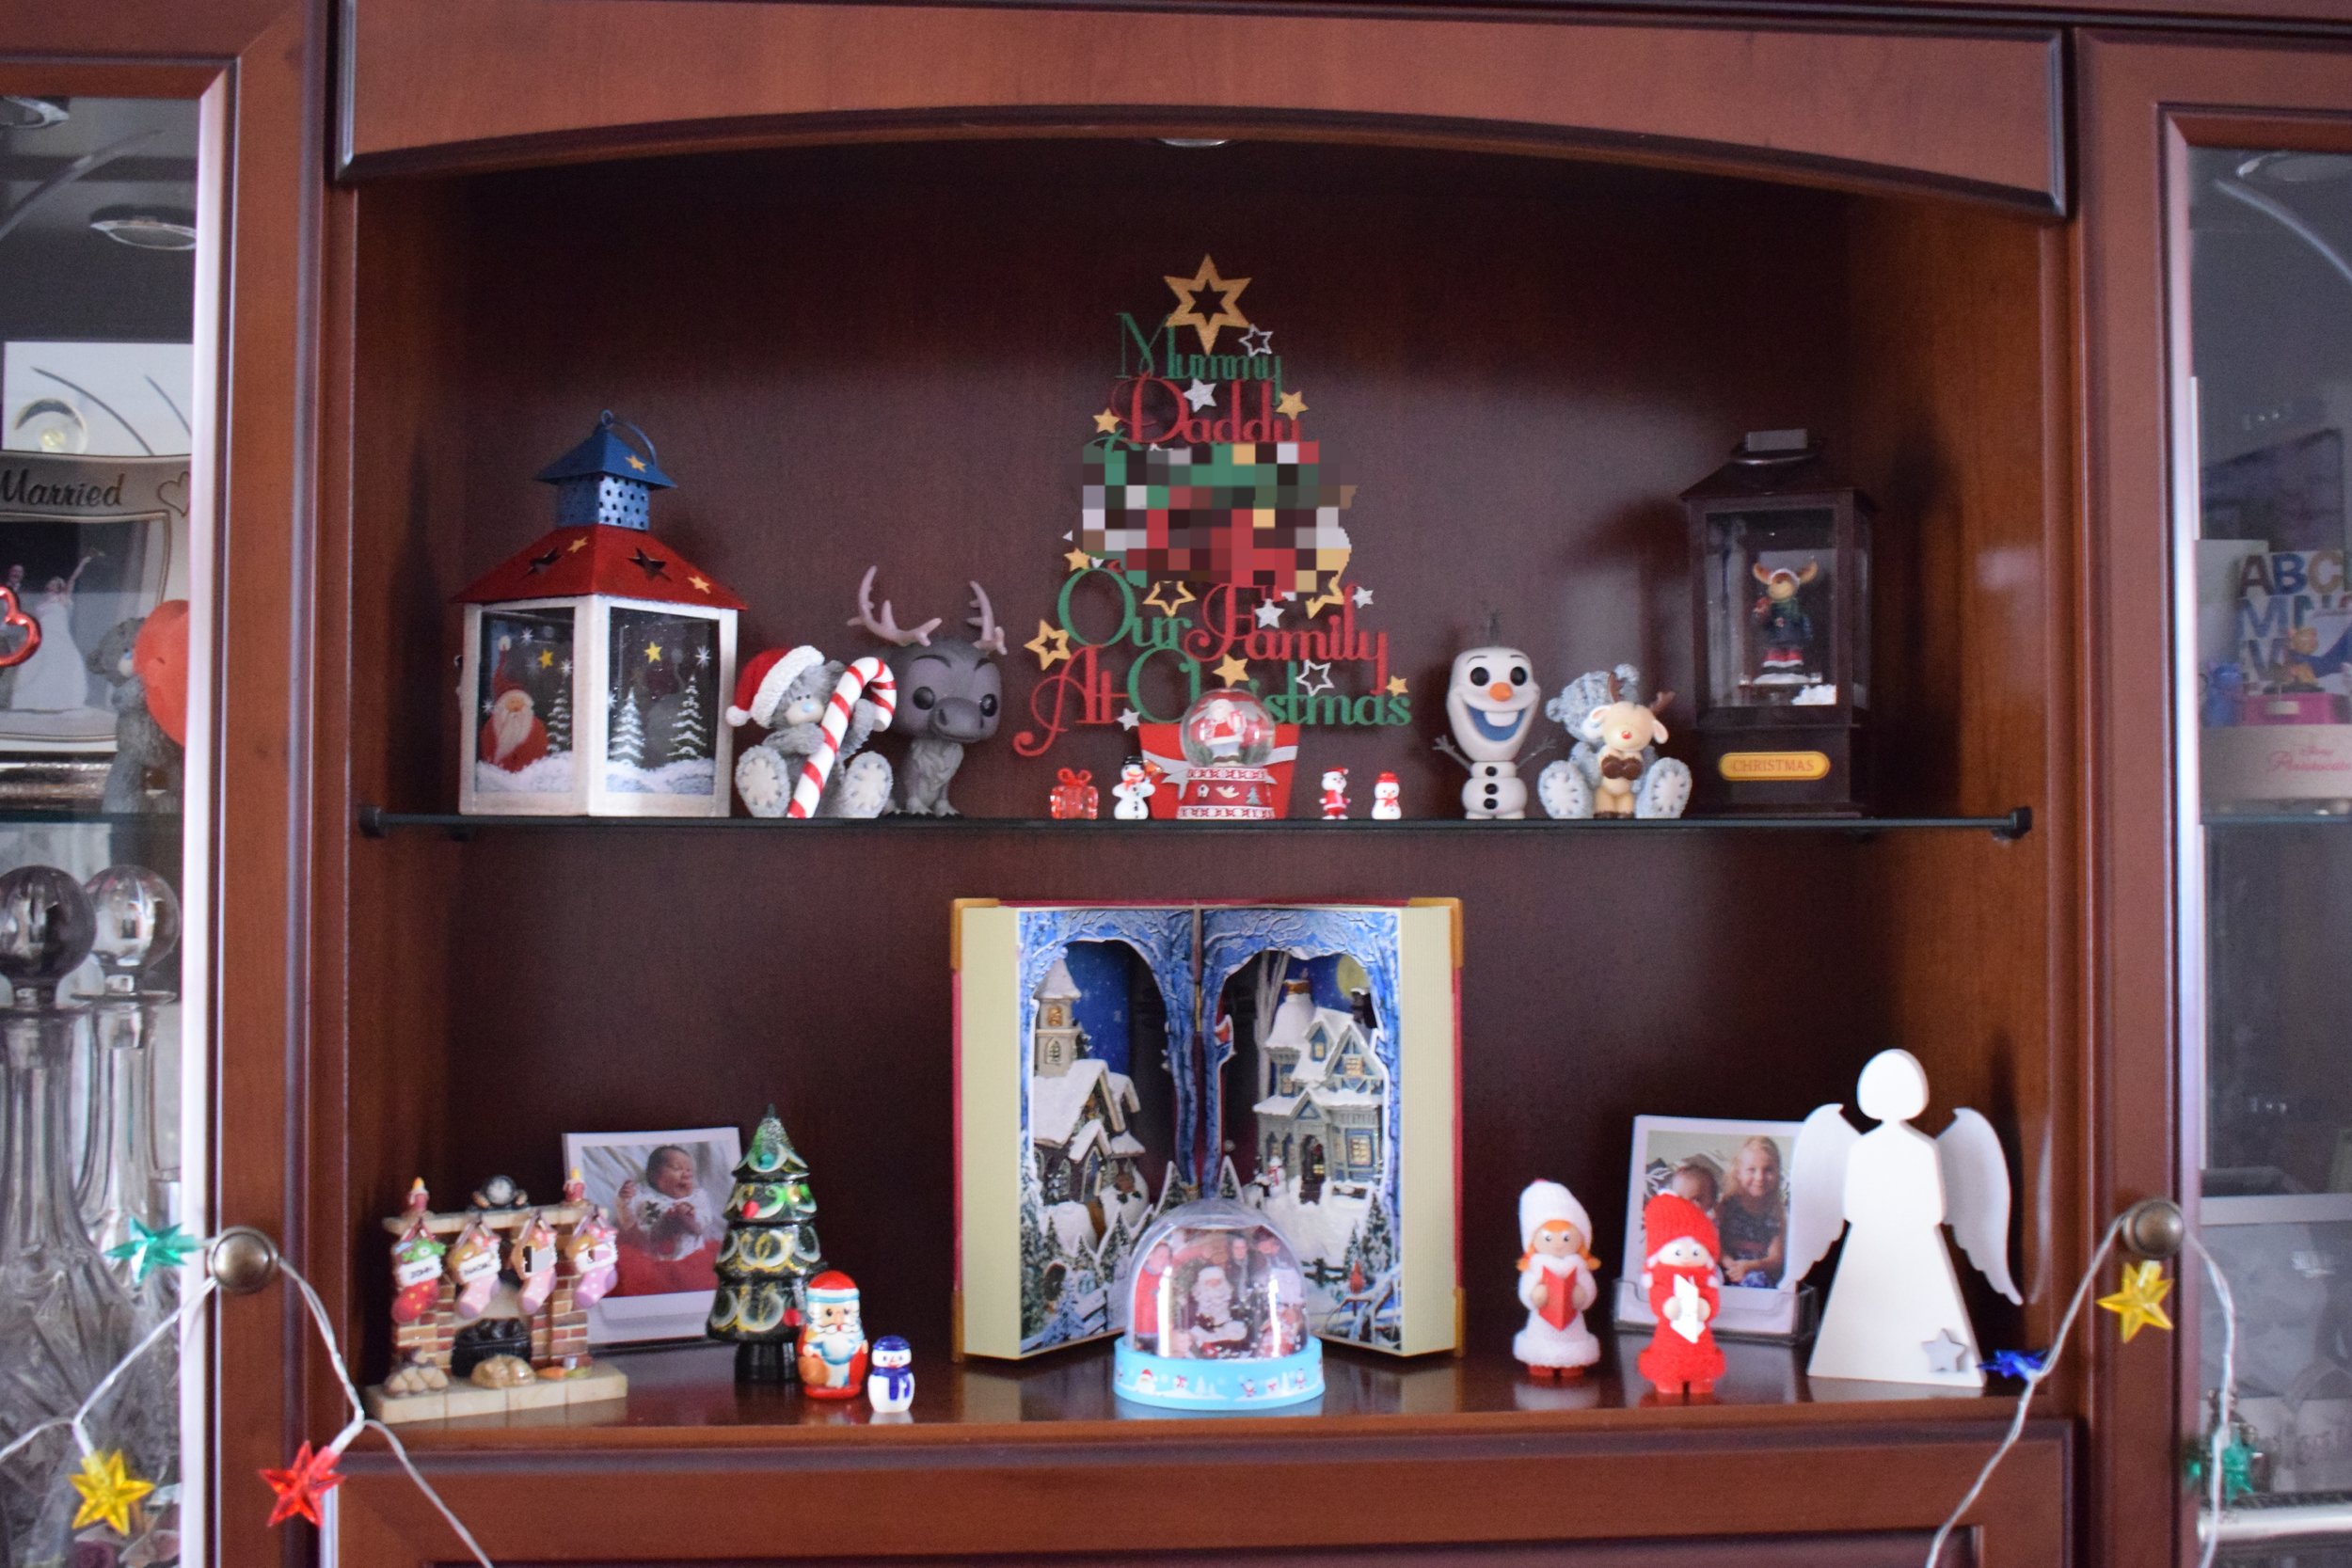 Our Christmas sideboard